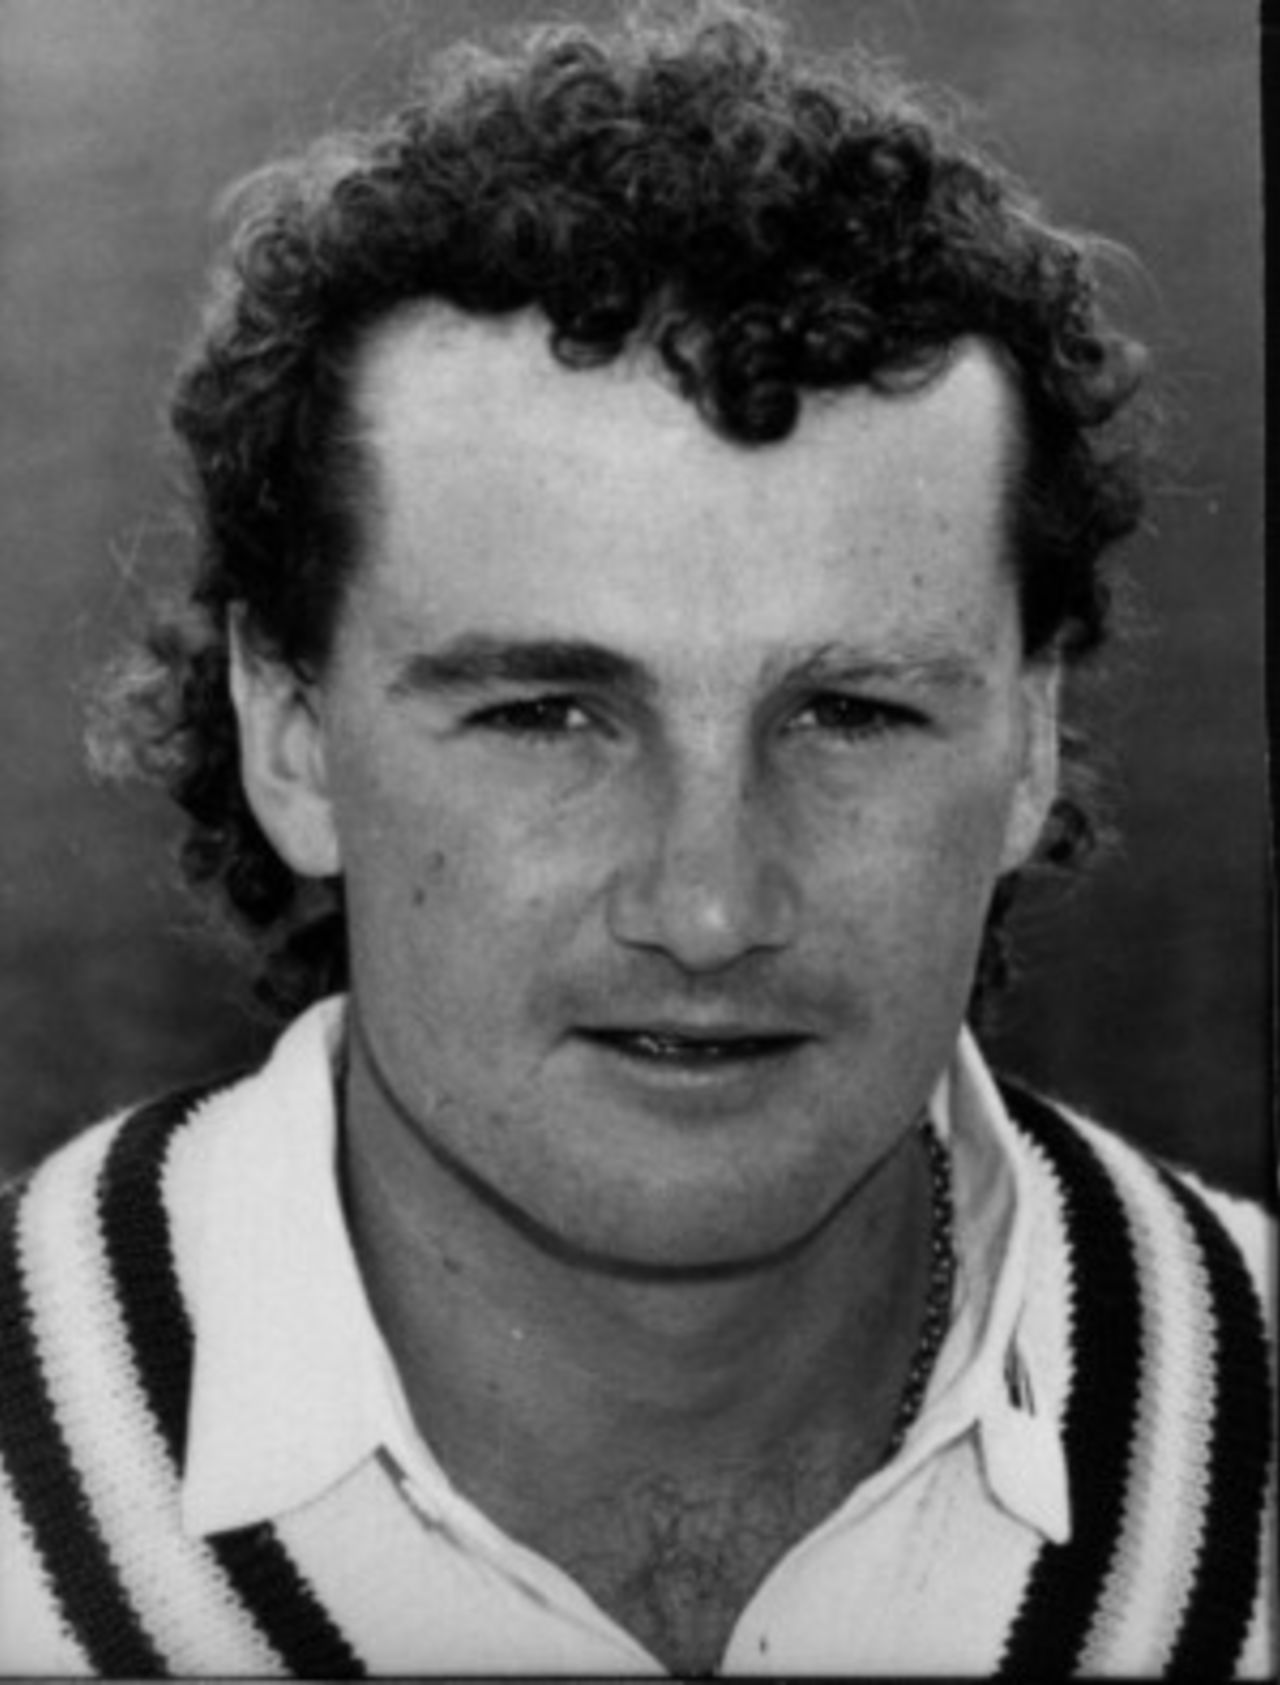 T.C.Middleton, Hampshire cricketer 1984-1992